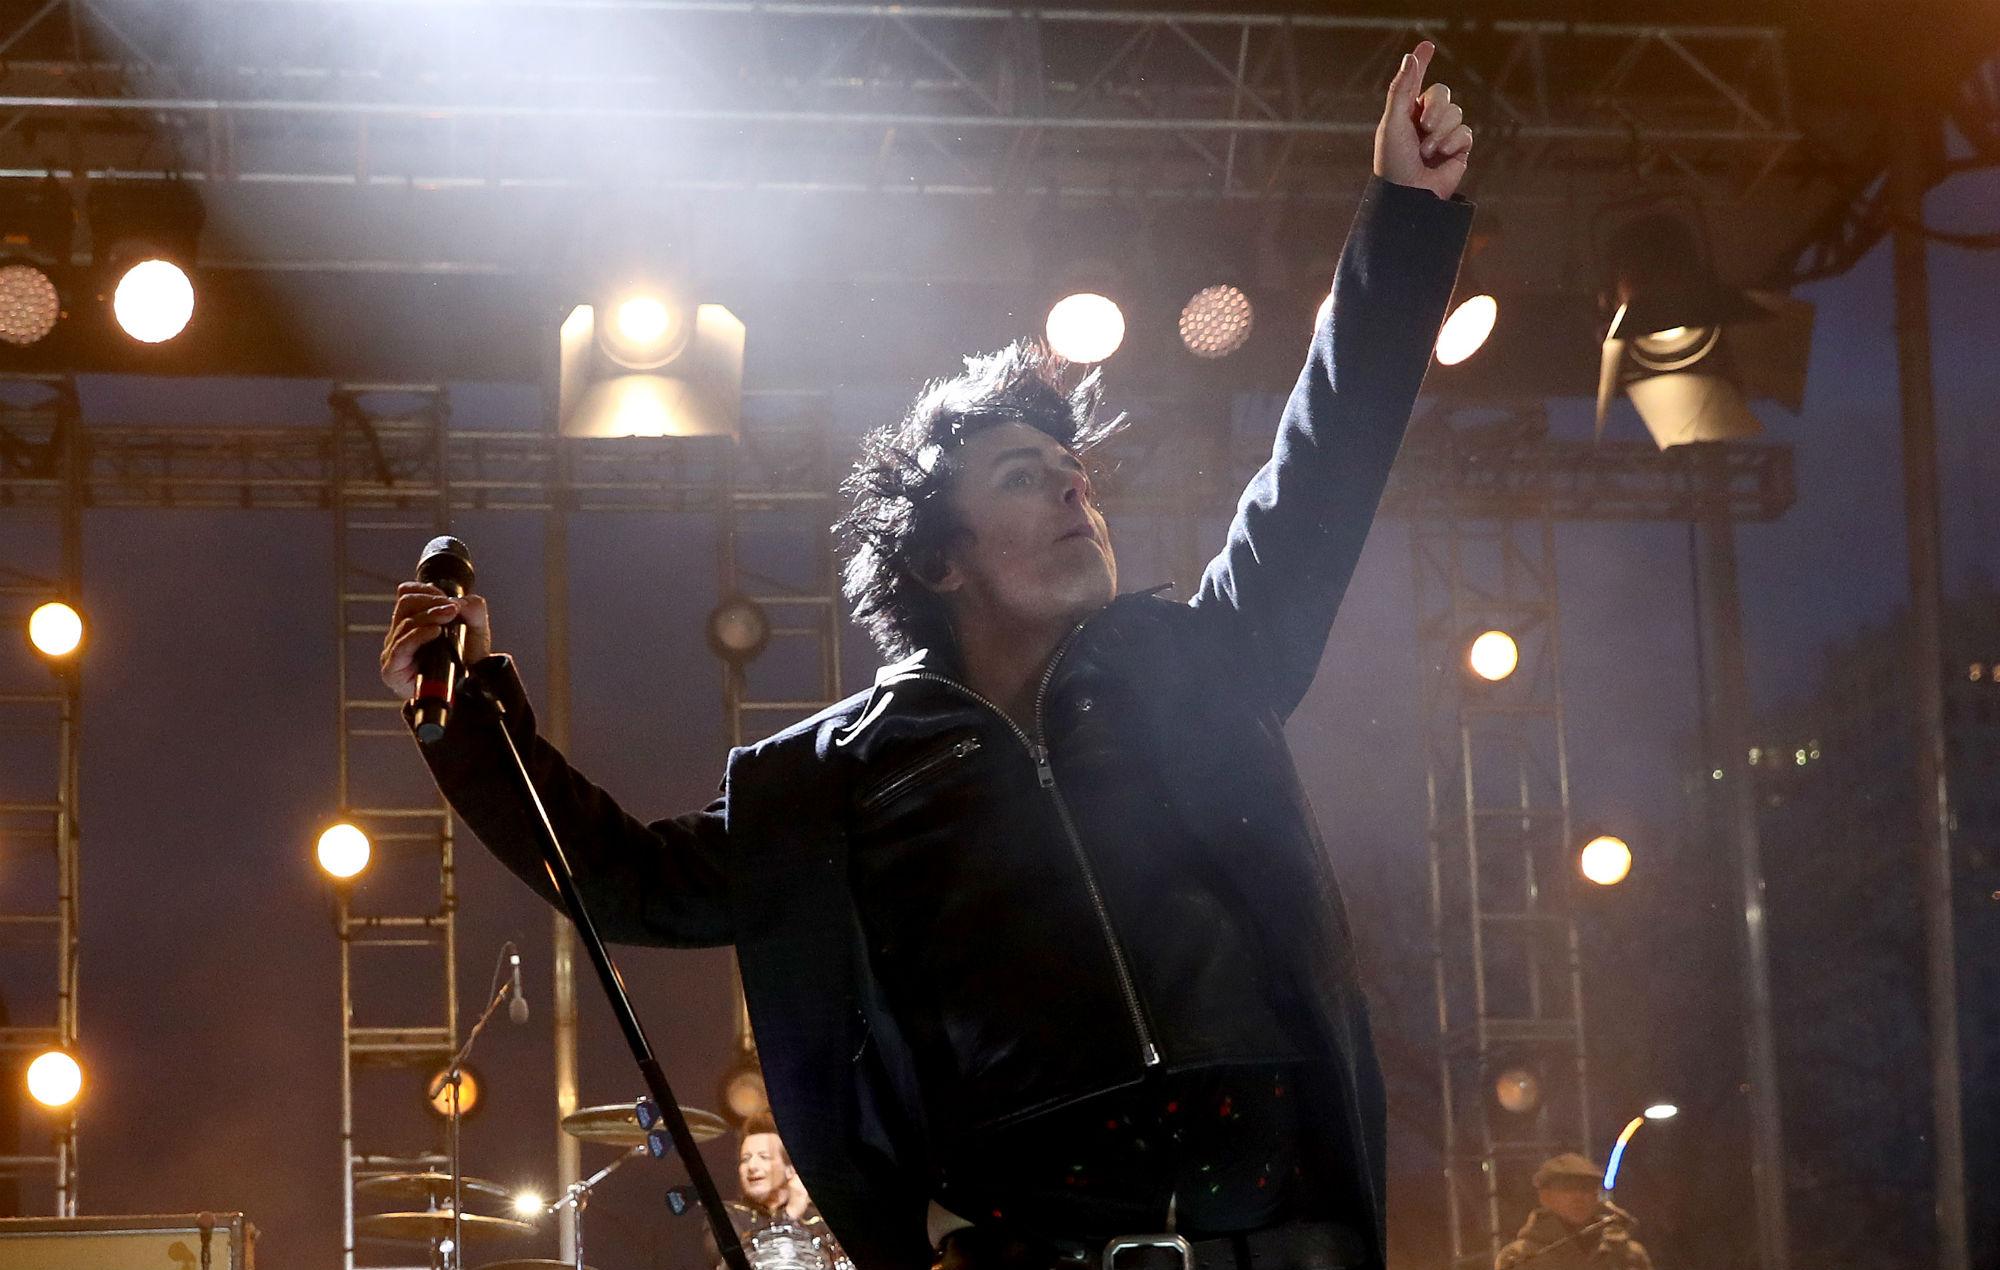 Watch Green Day Deliver A Sweary Performance At NHL All Star Game